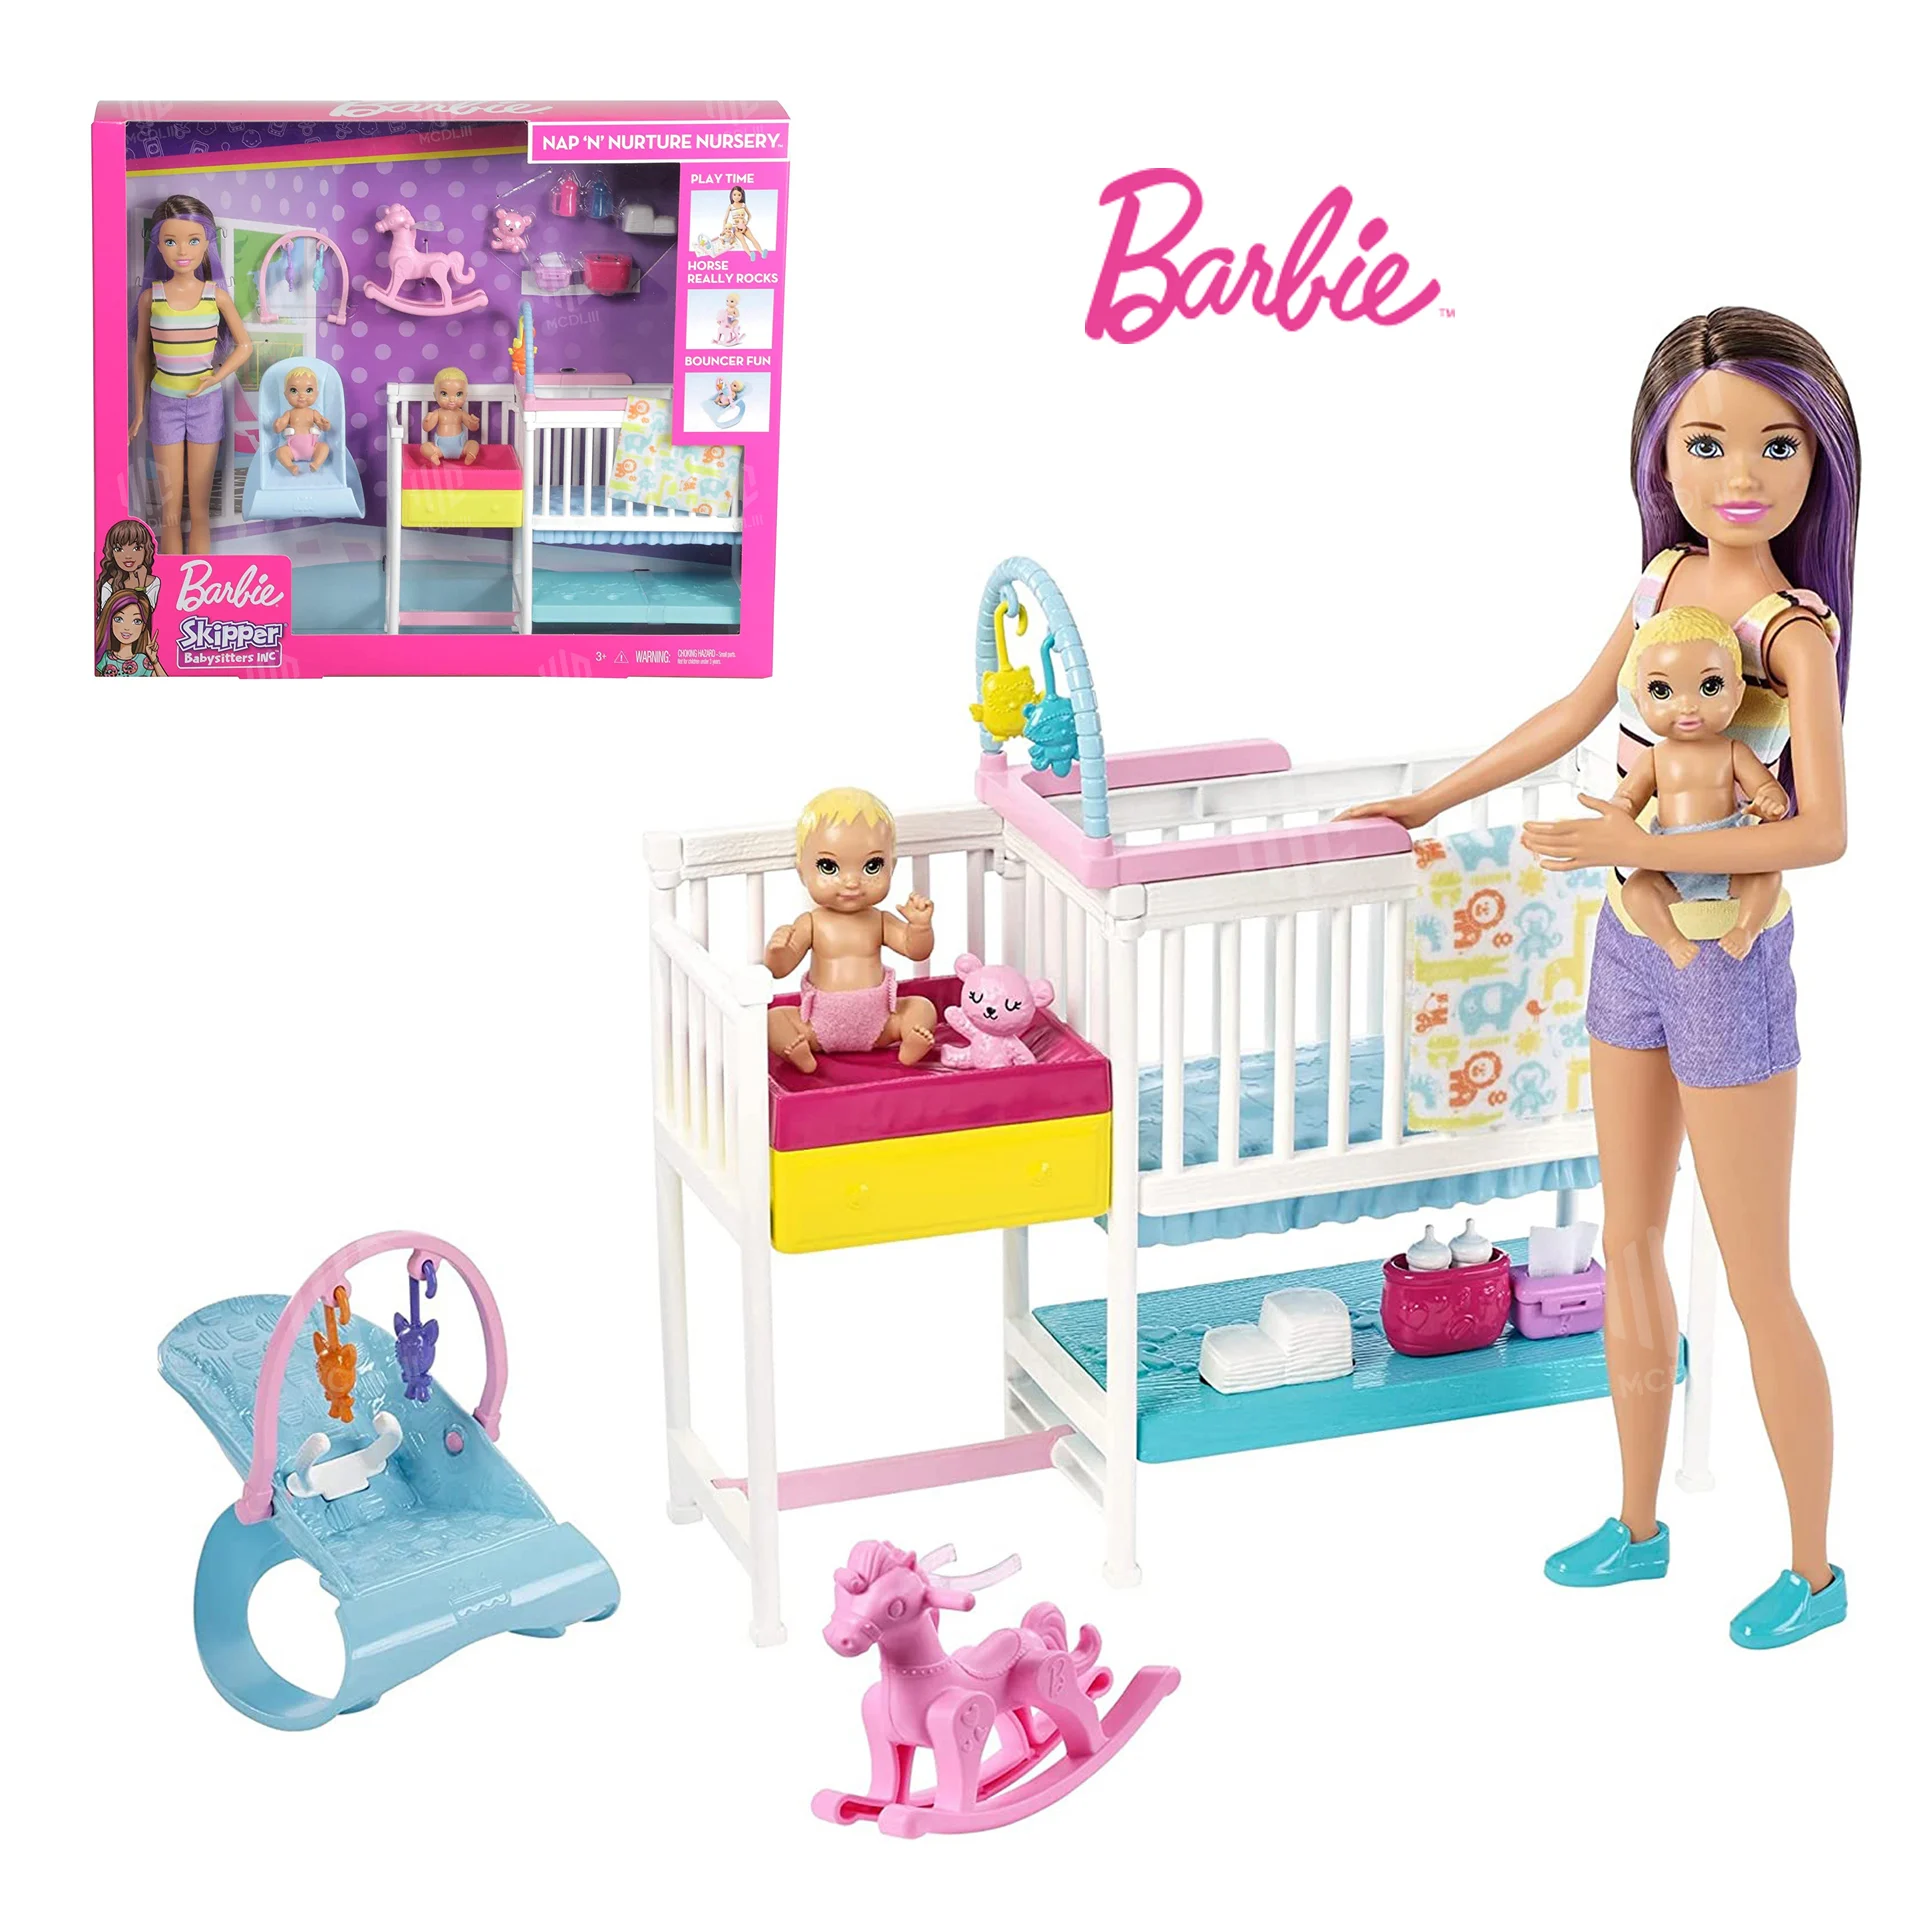 Barbie Skipper Babysitters Inc. Playset and Doll with Blonde Hair